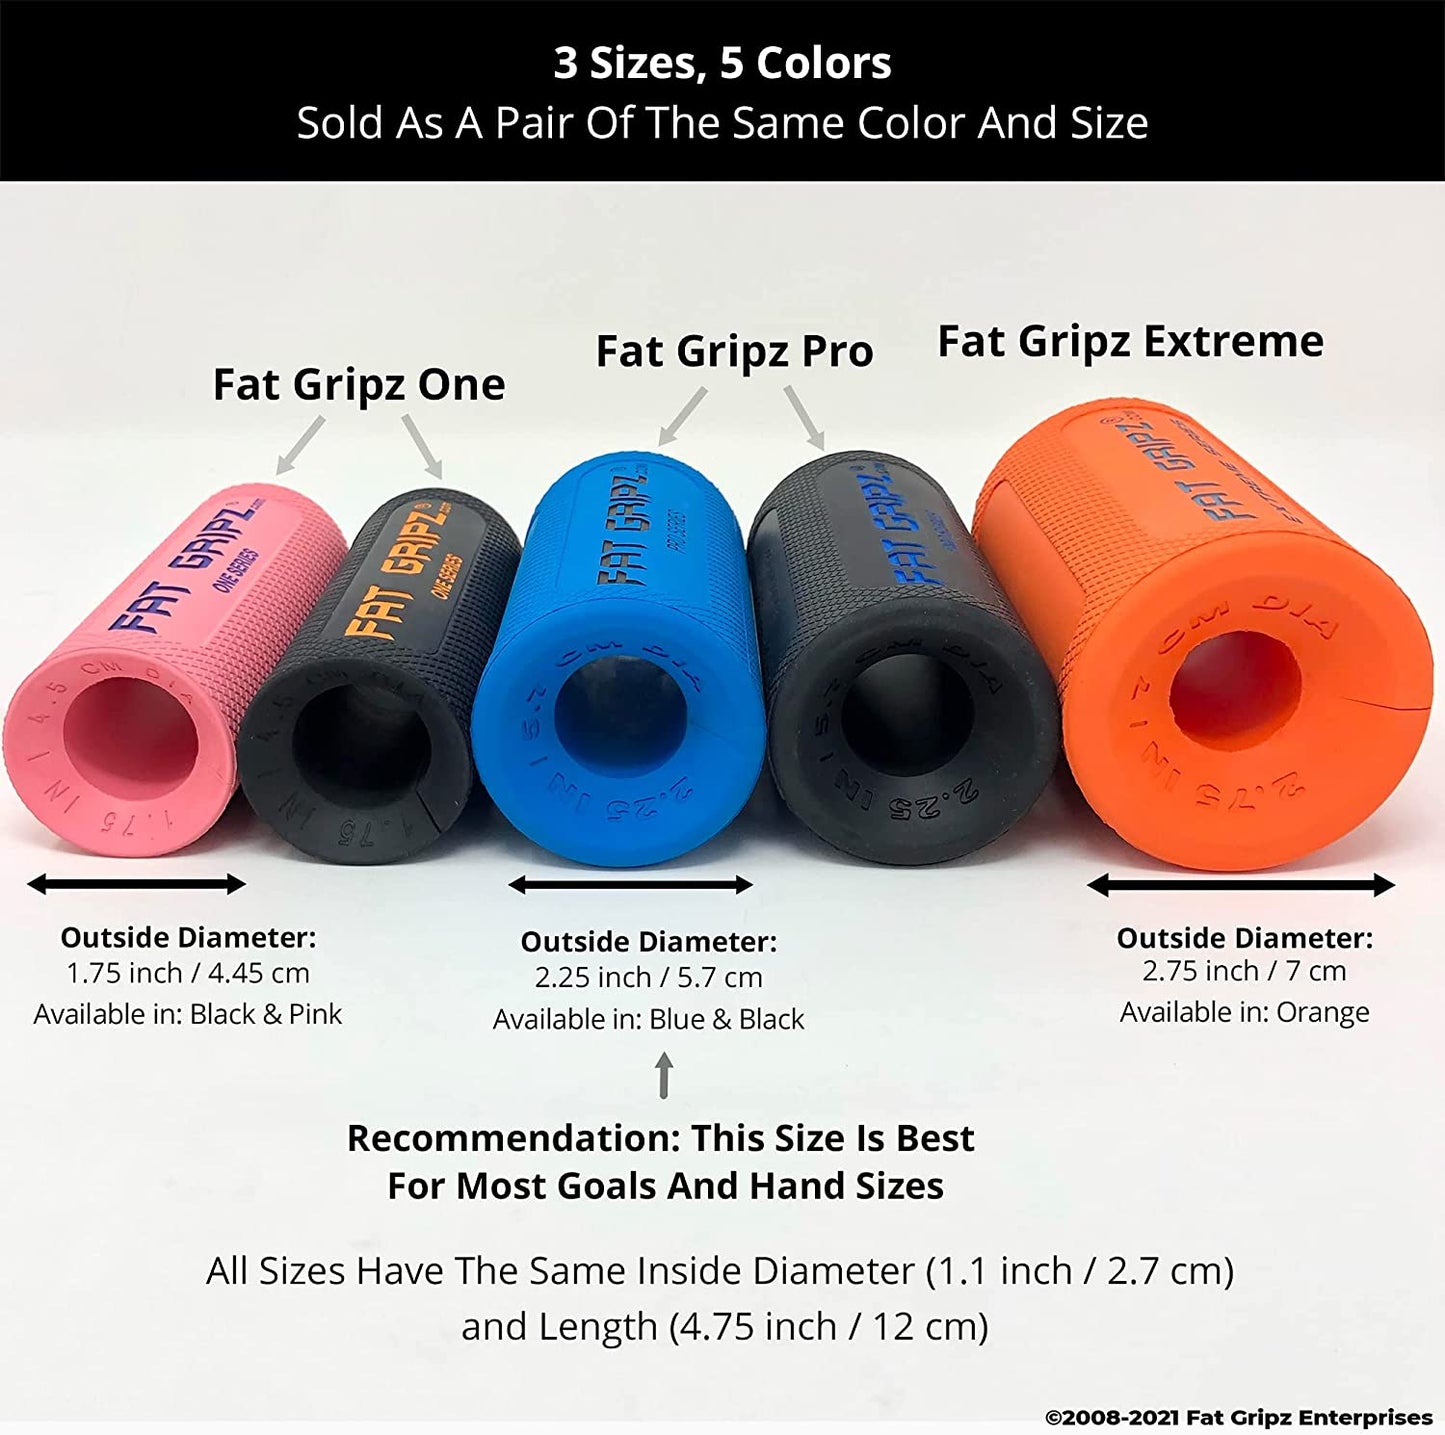 Fat Gripz One (1.75" Outer Diameter) - (For 6 piece(s))